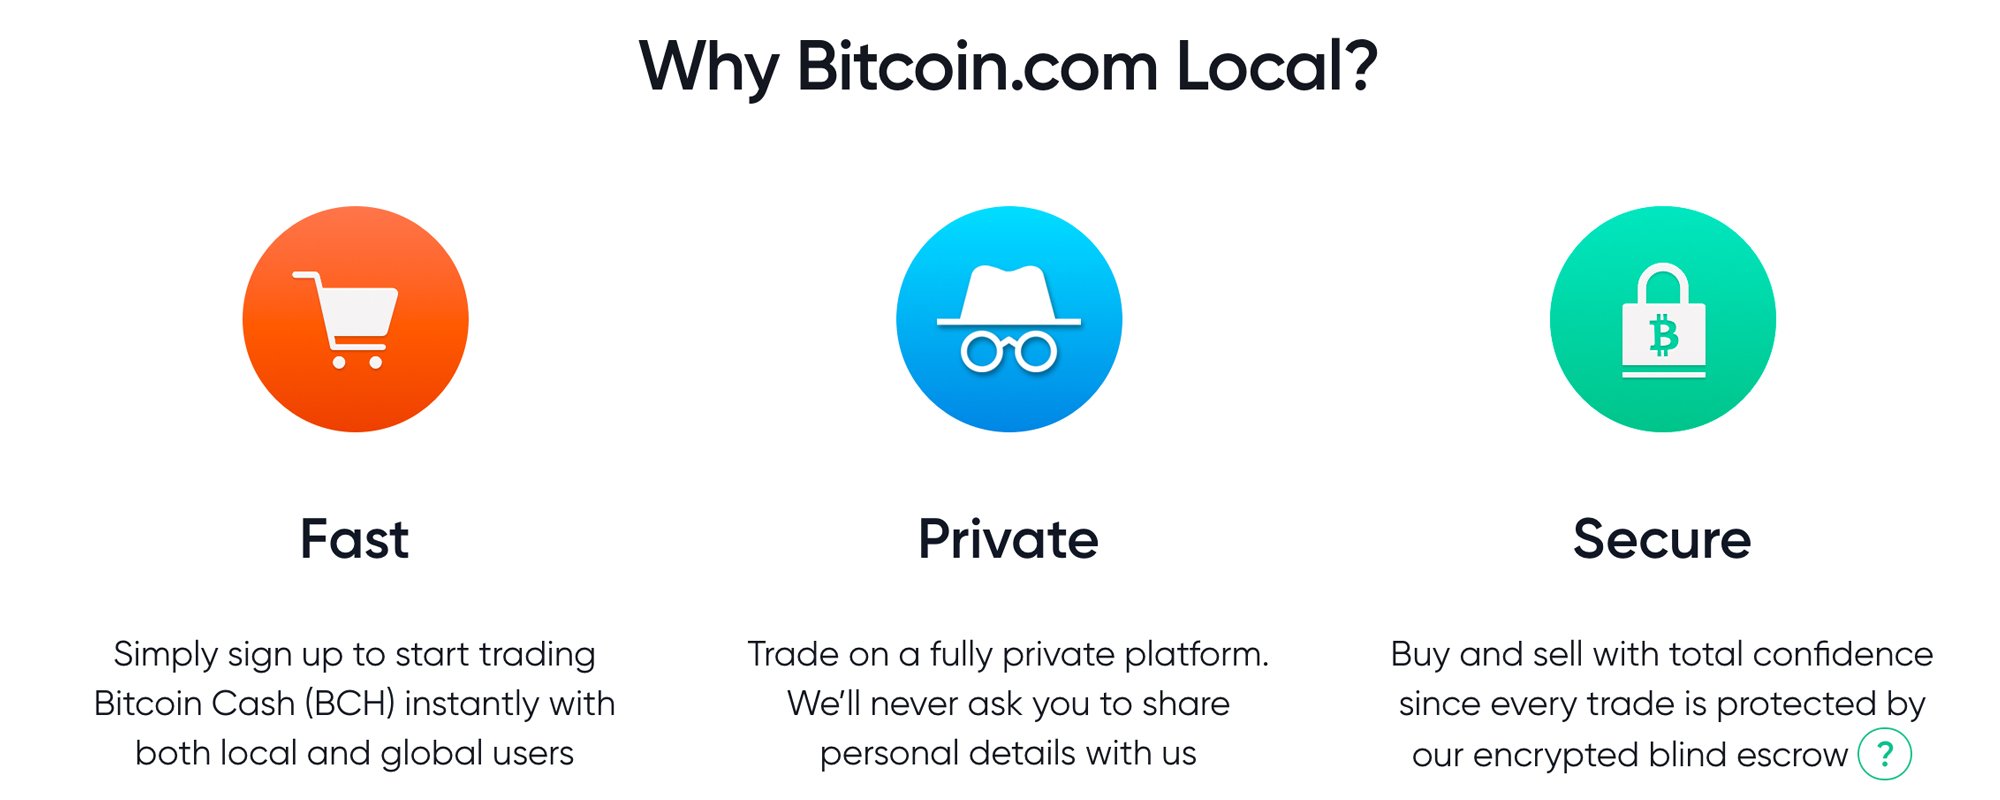 Bitcoin.com Local Gathers Steam as Other P2P Markets Falter